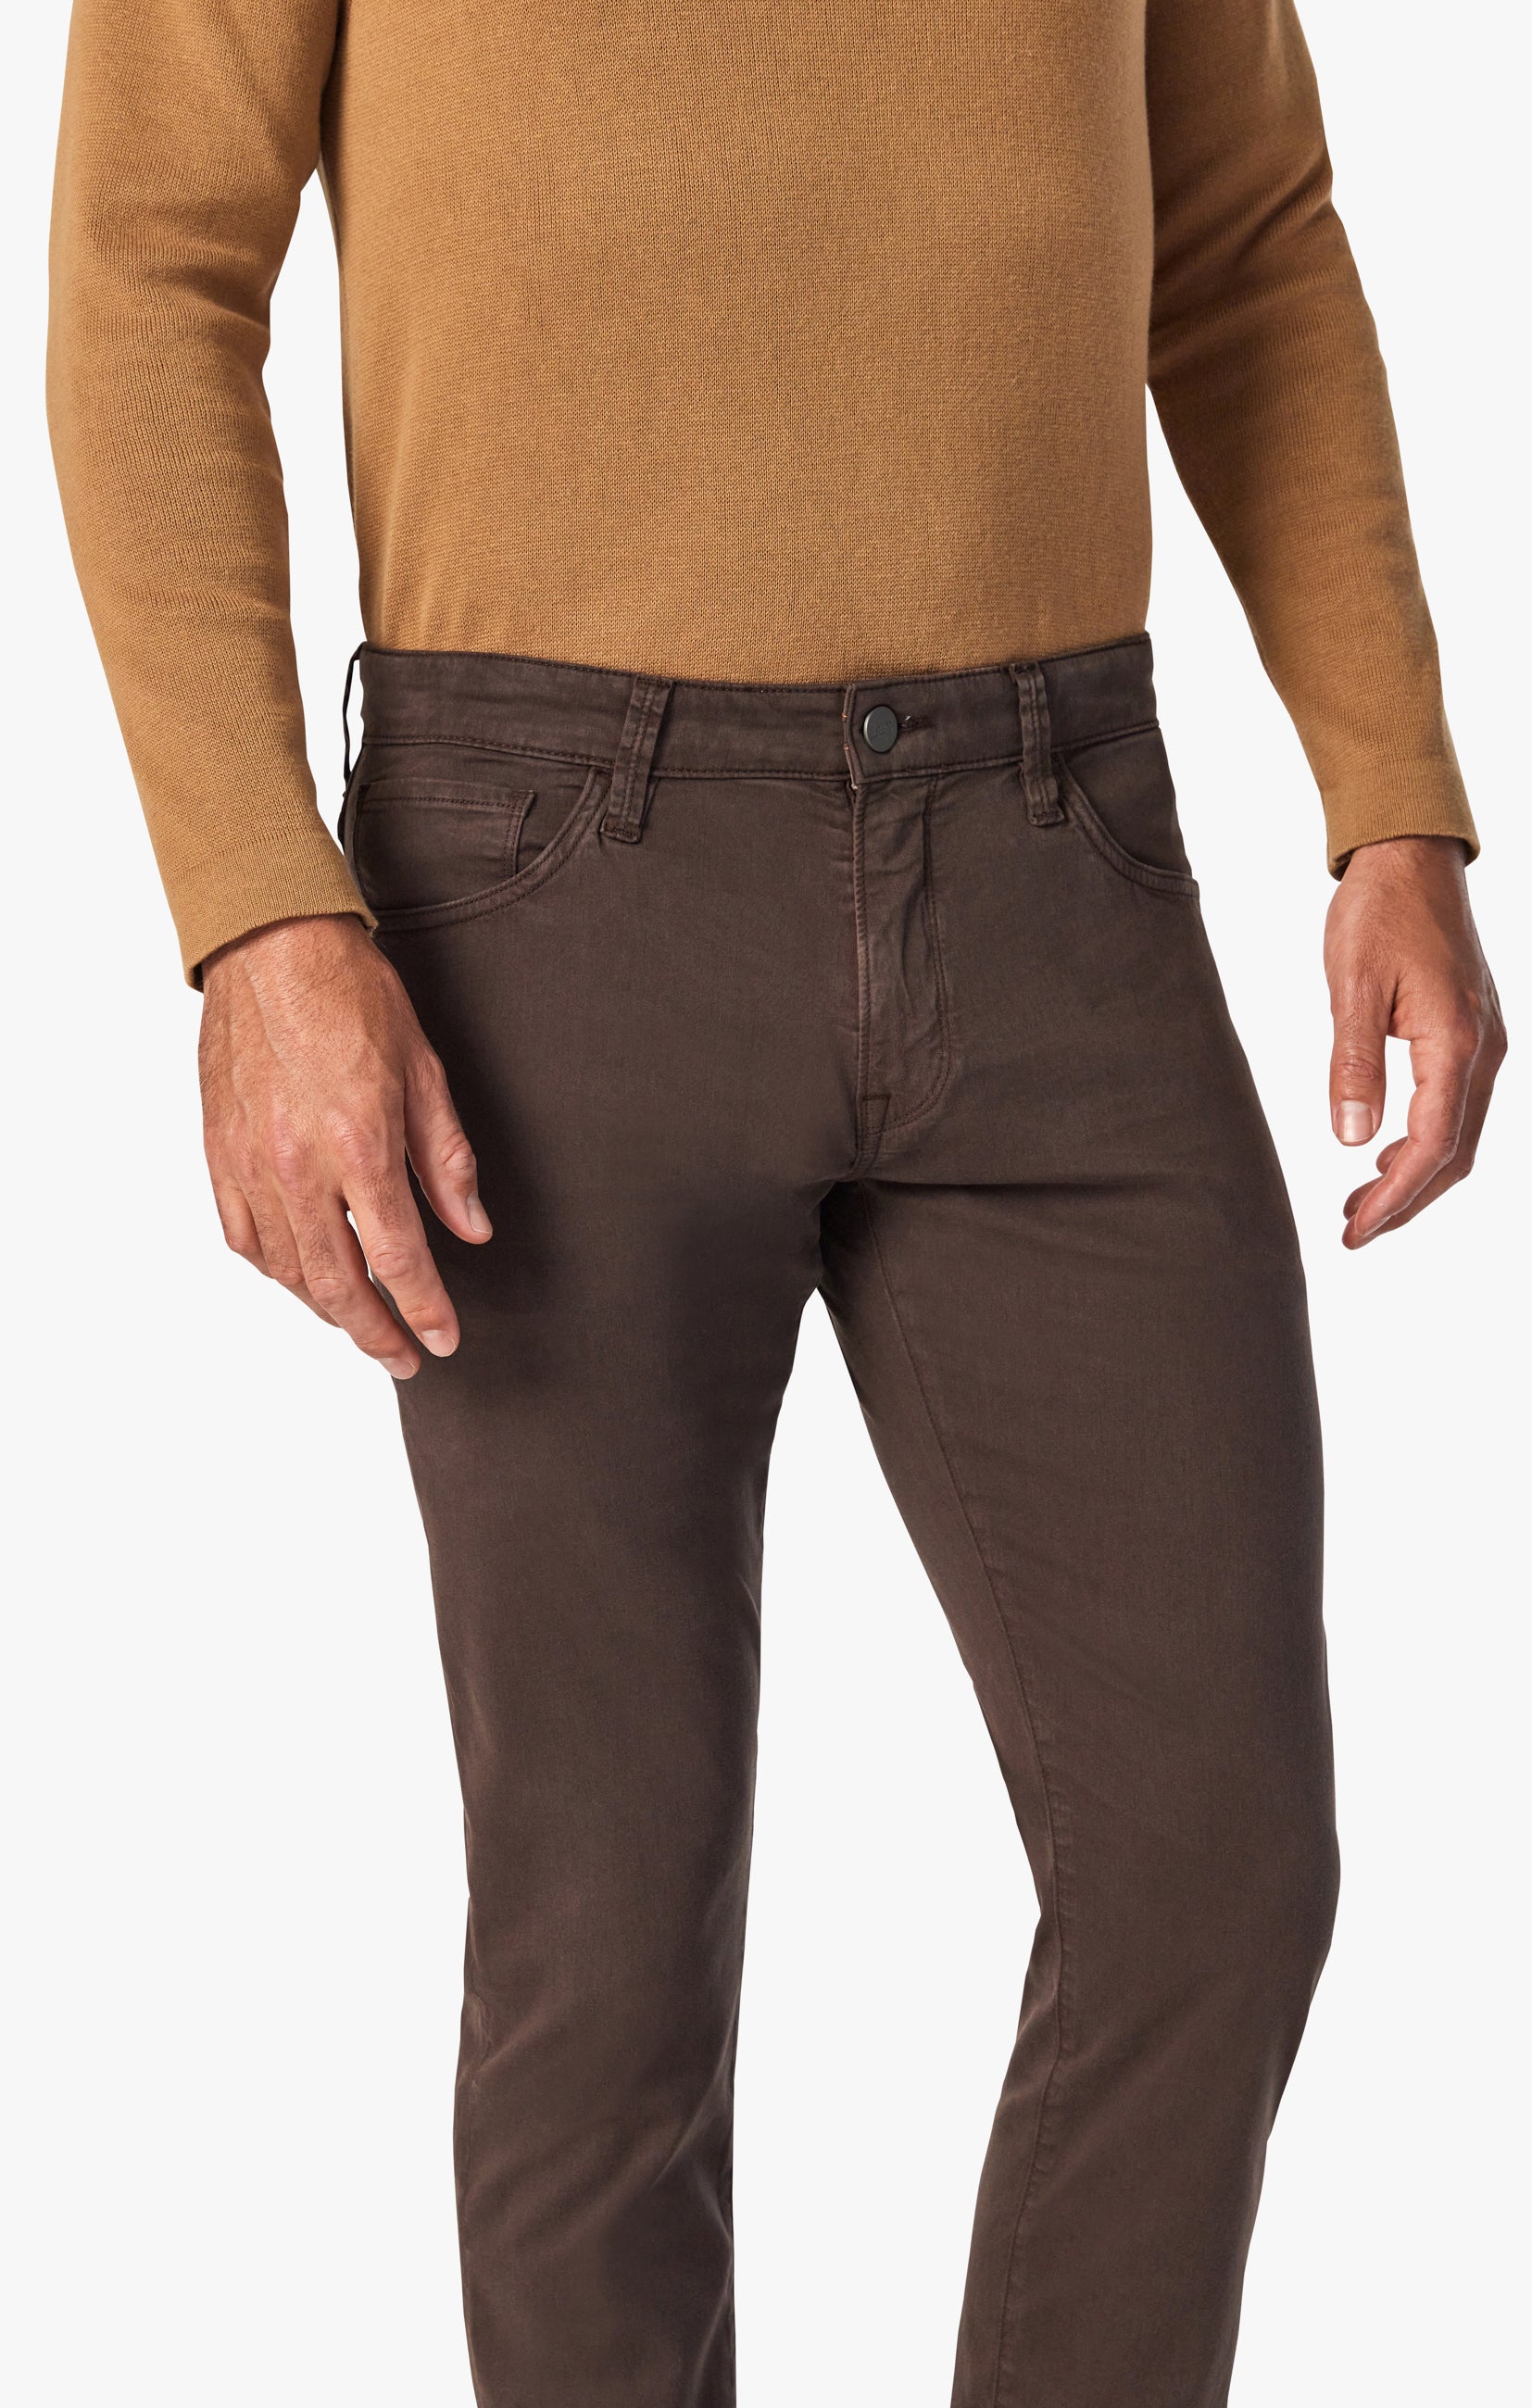 Cool Tapered Leg Pants In Fudge Twill Image 4